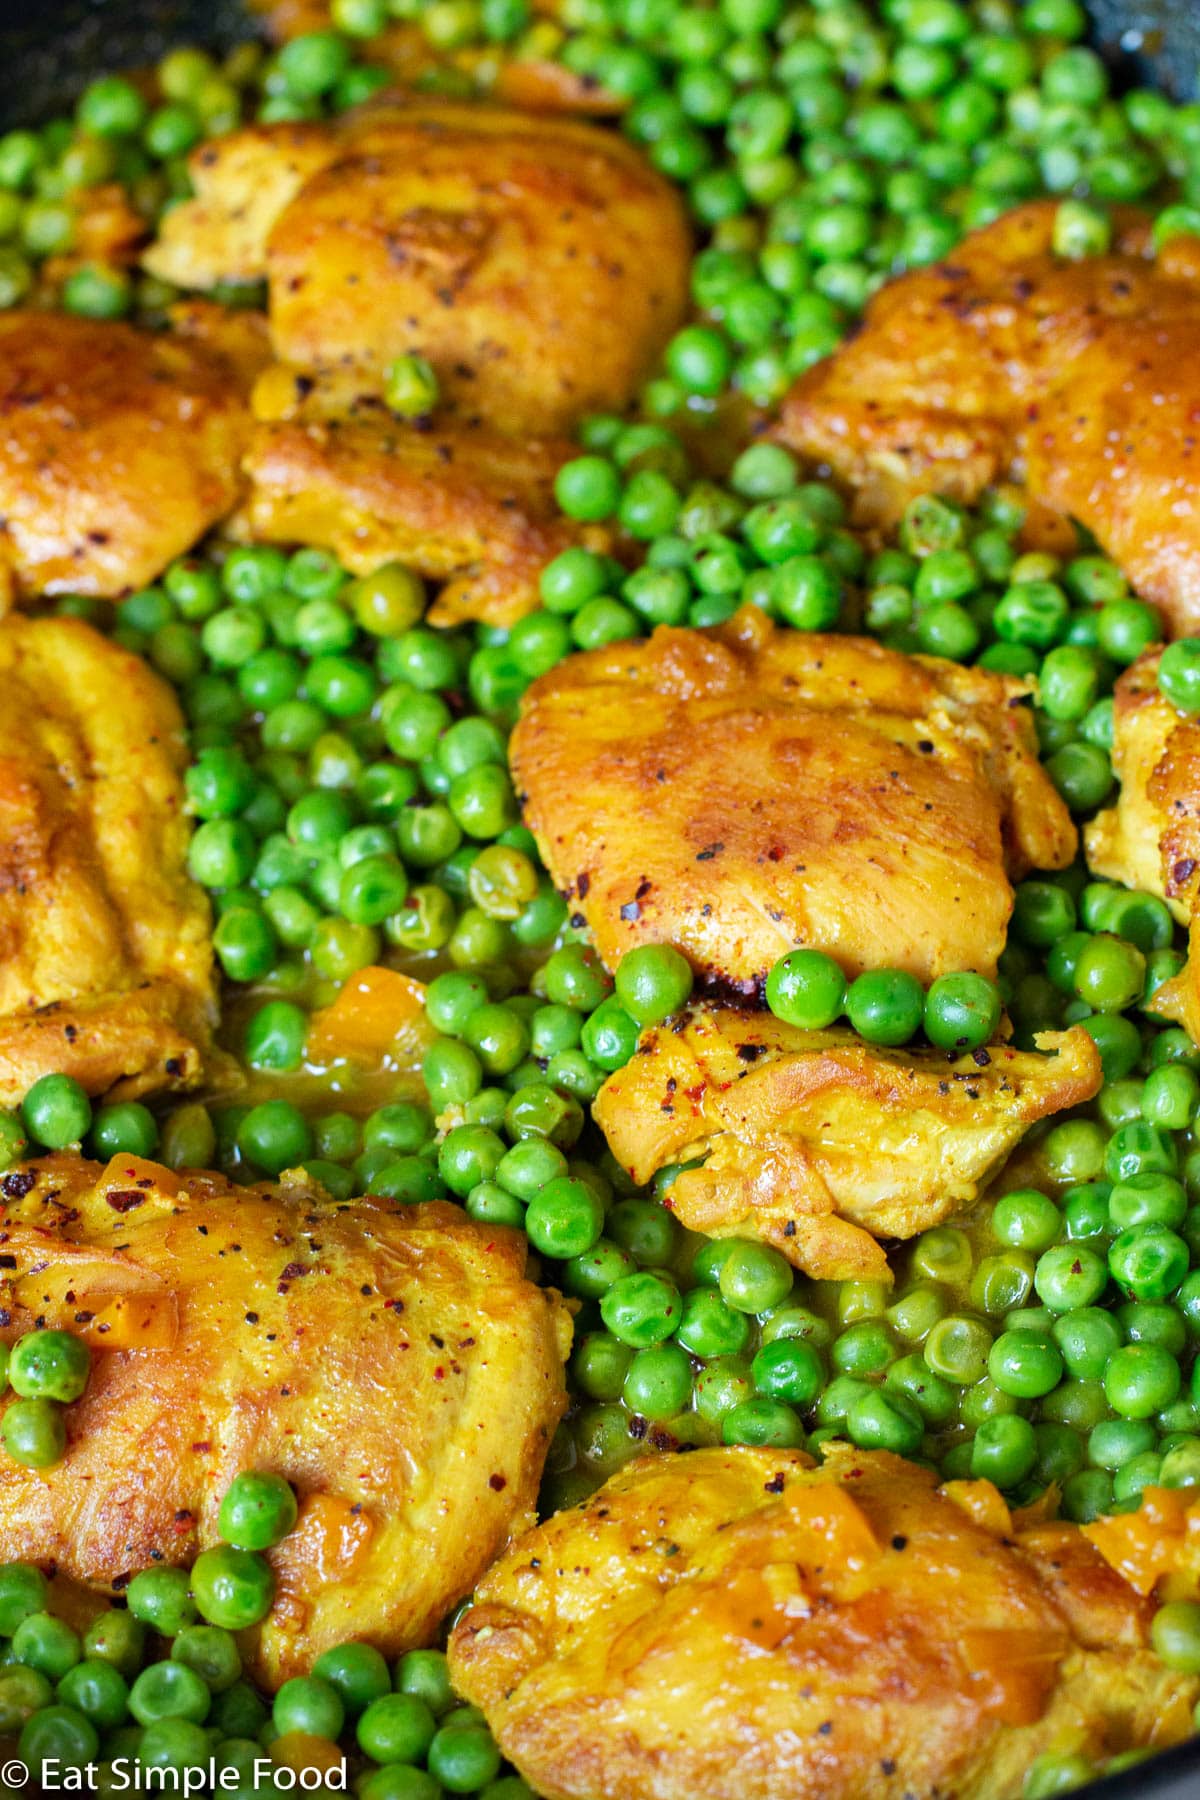 Browned boneless skinless chicken thighs on a bed of vibrant green peas. Side view. Close up.